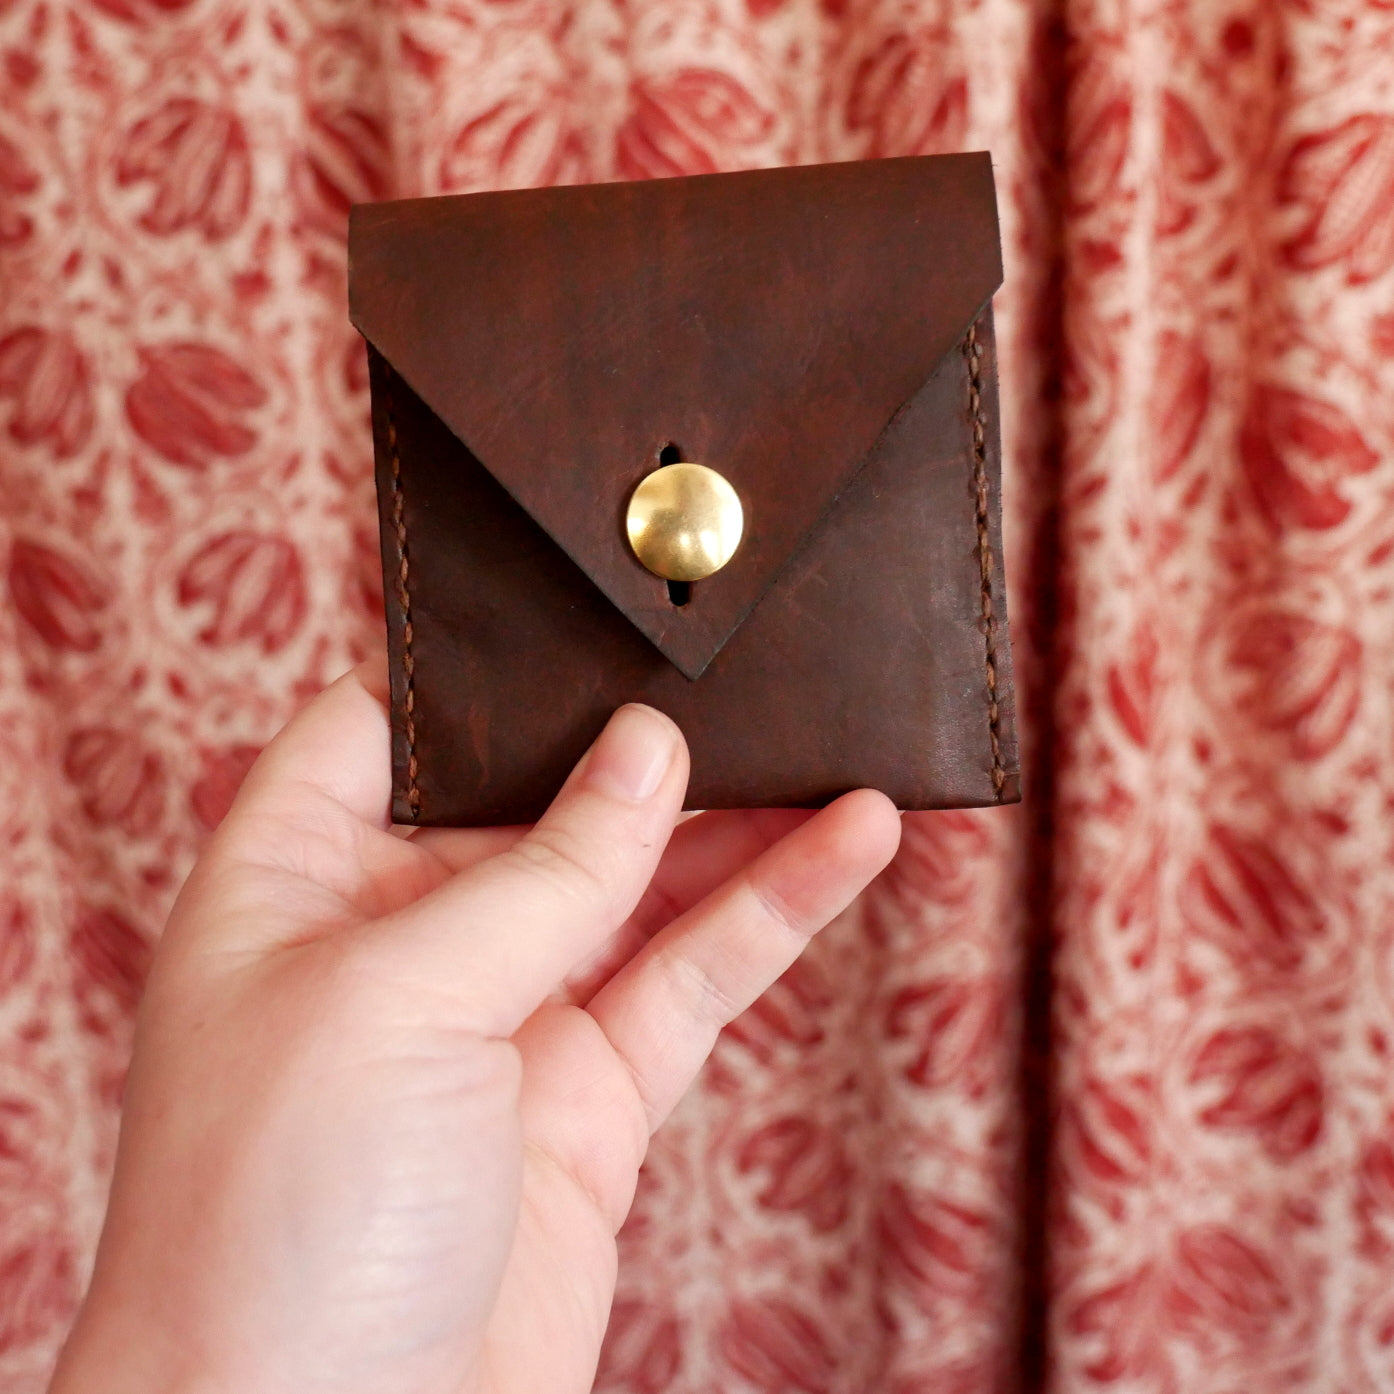 Leather Coin Wallet - Handmade Leather Coin Purse